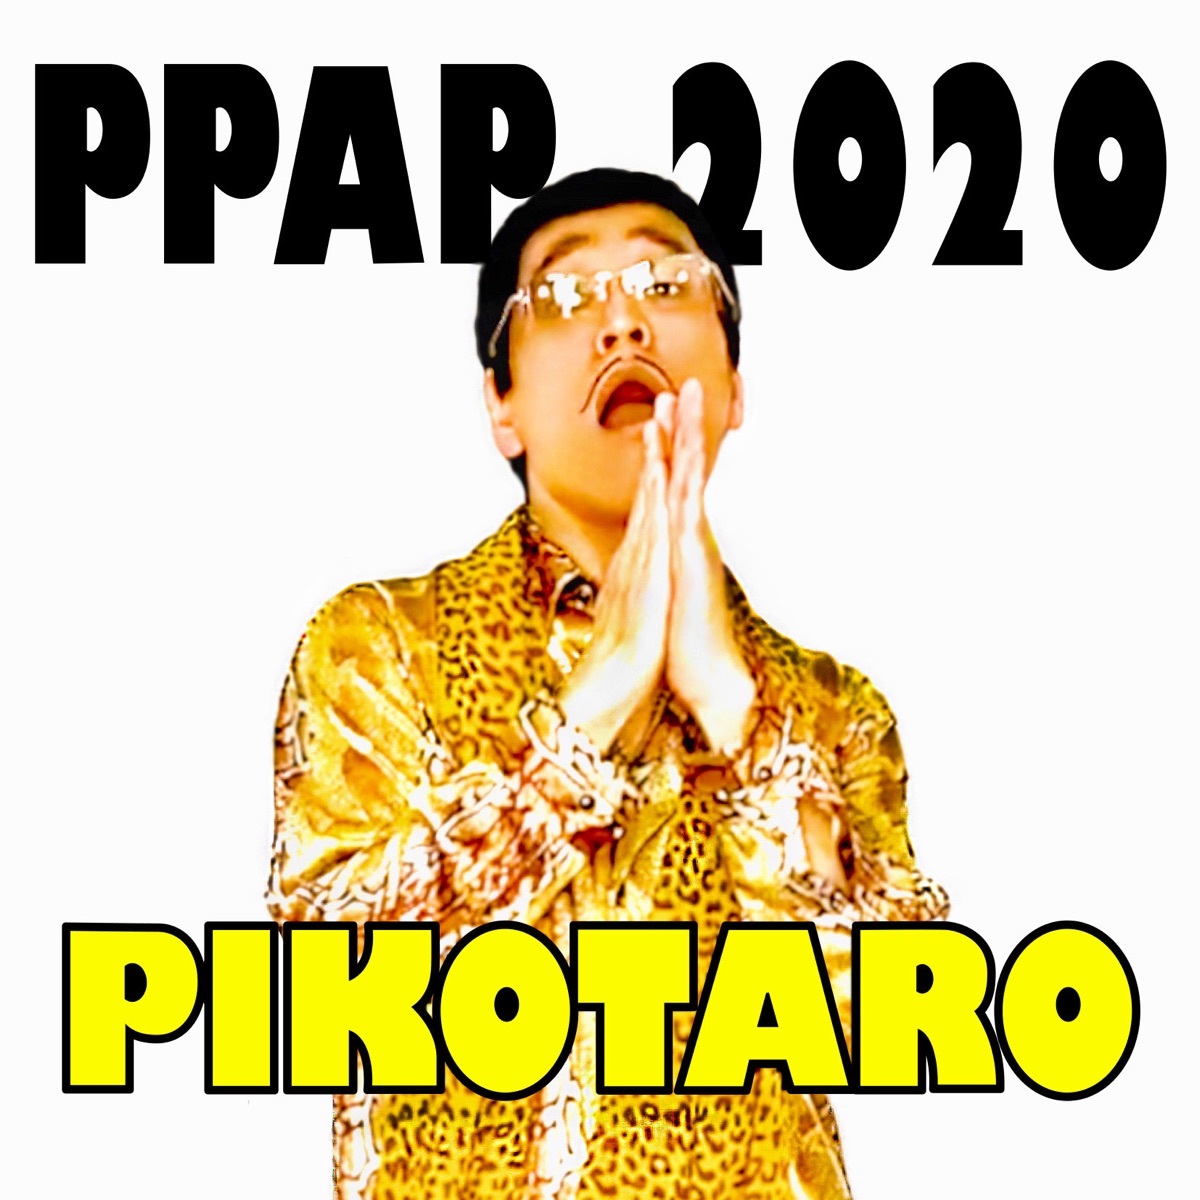 Cover art for『PIKOTARO - PPAP-2020-』from the release『PPAP-2020-